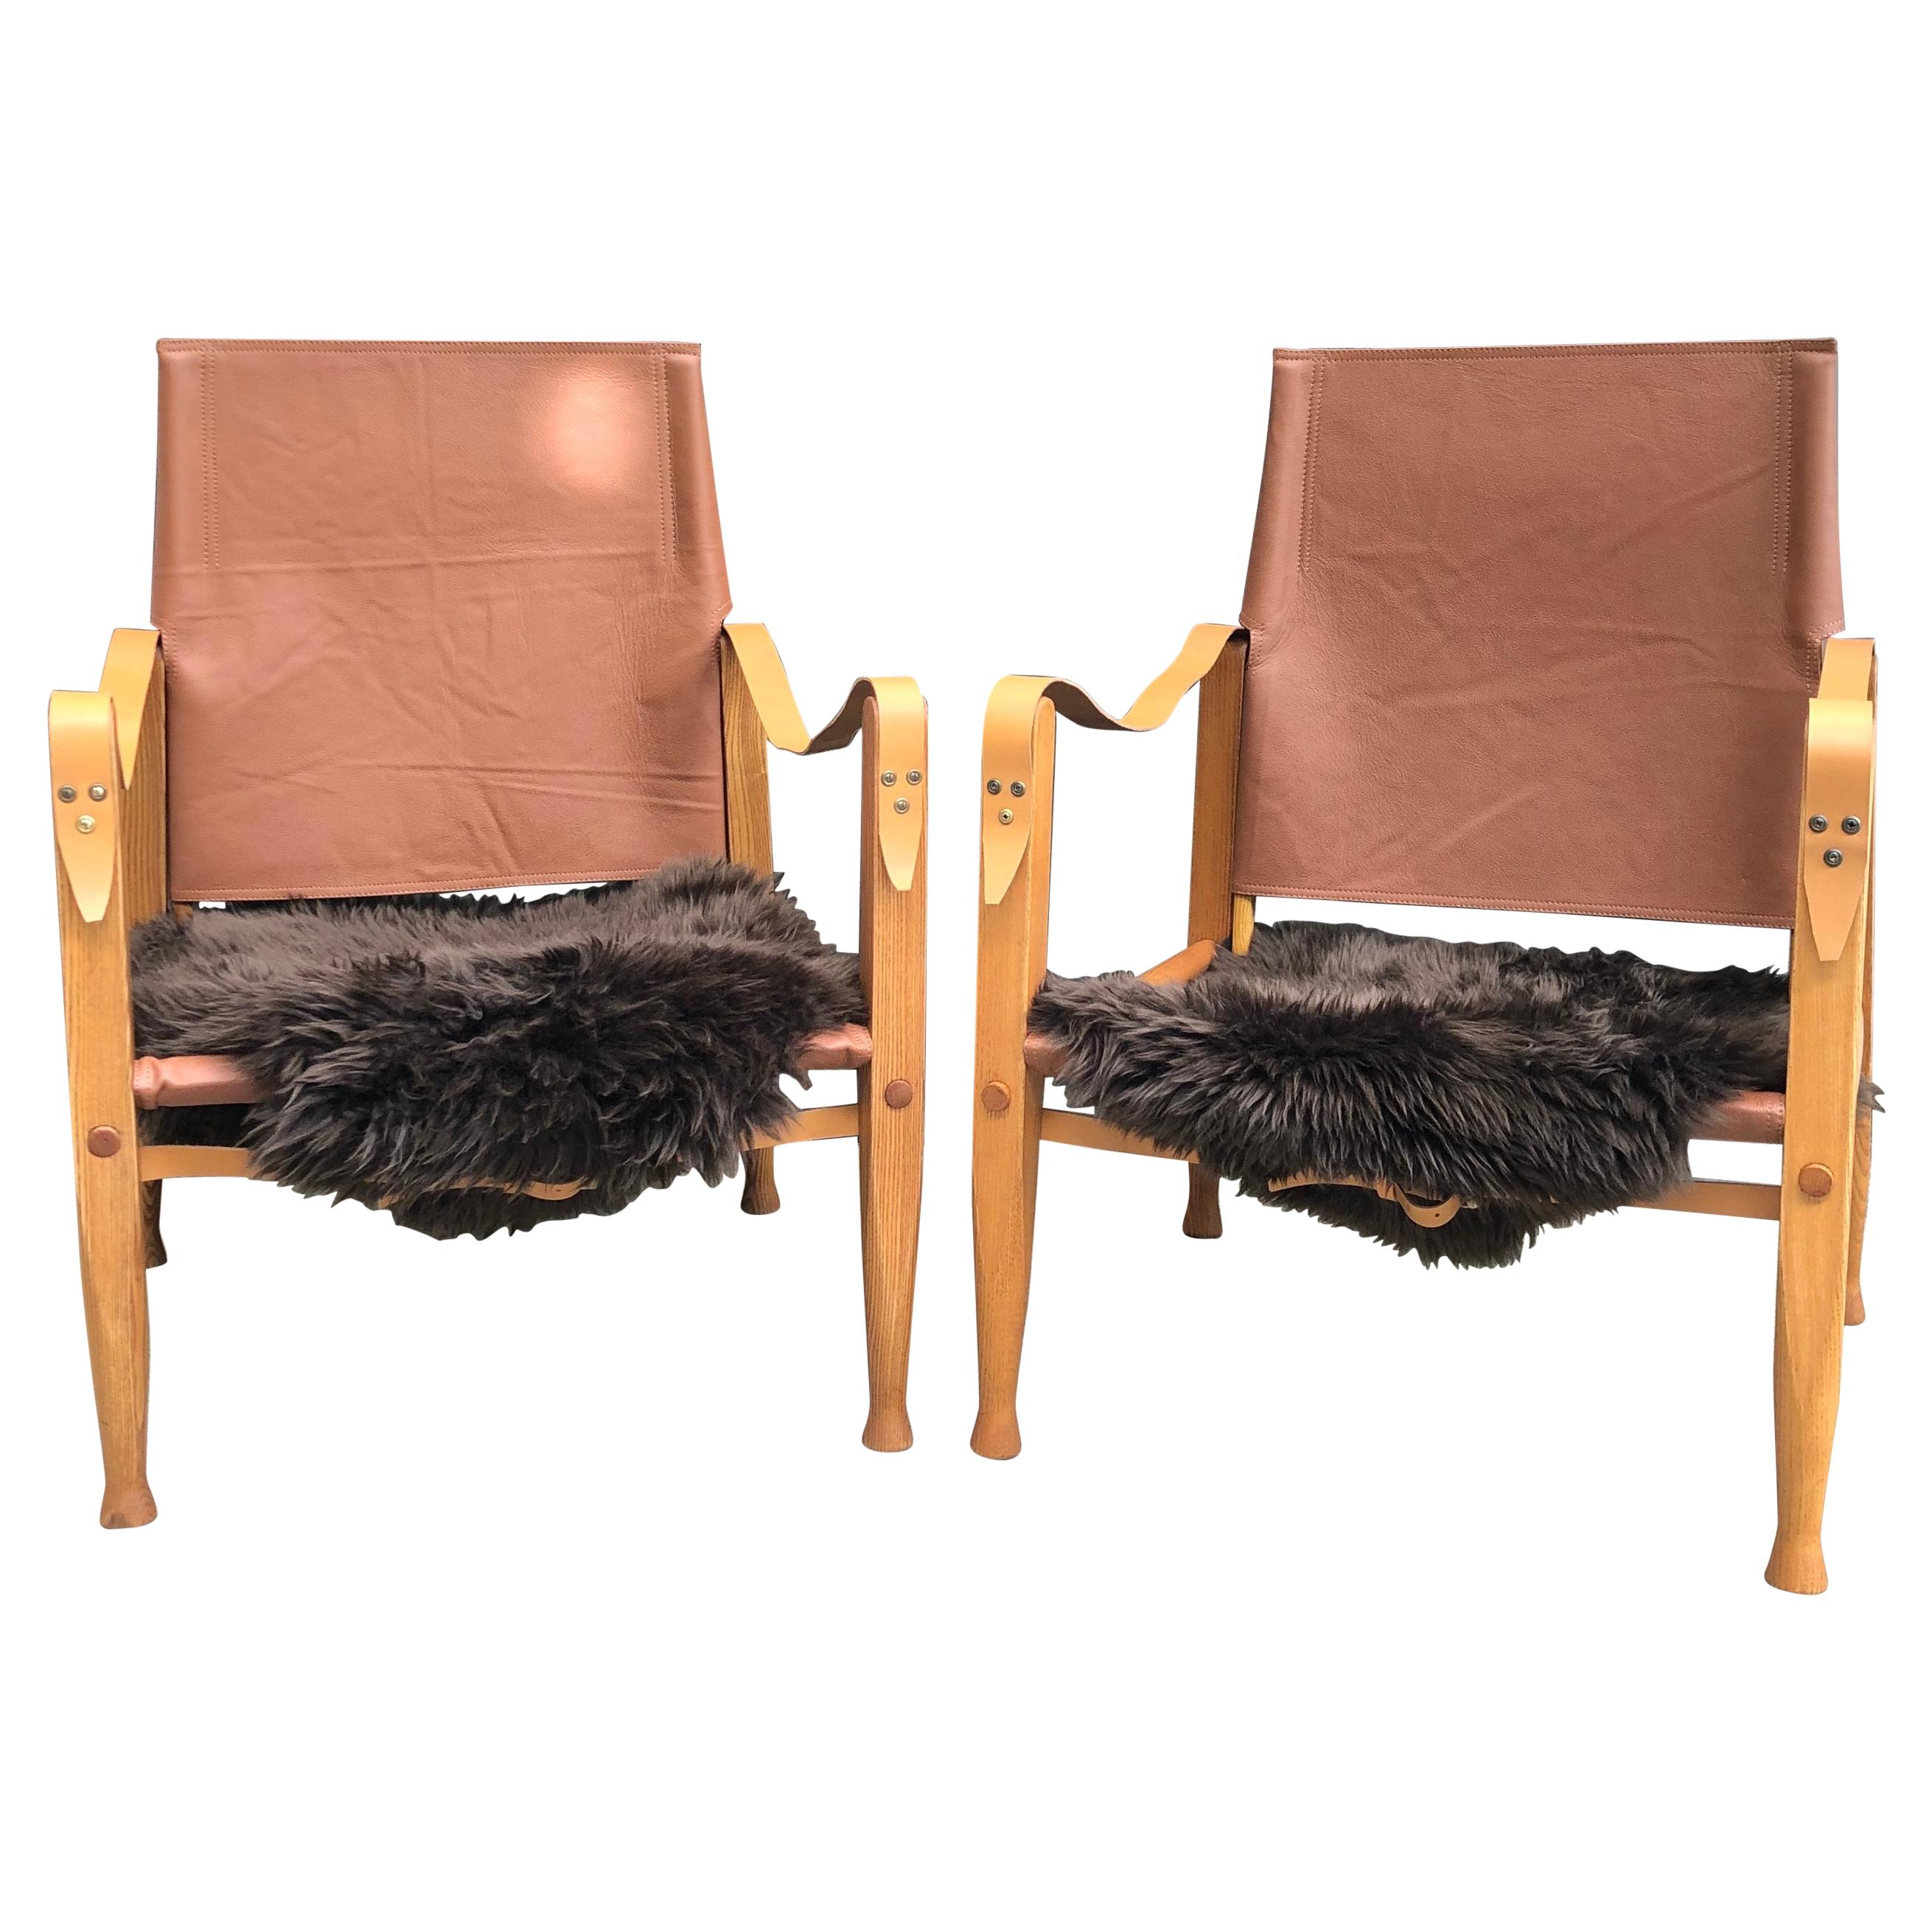 Pair of Vintage Refurbished Kaare Klint Safari Chairs from the 1960s For Sale